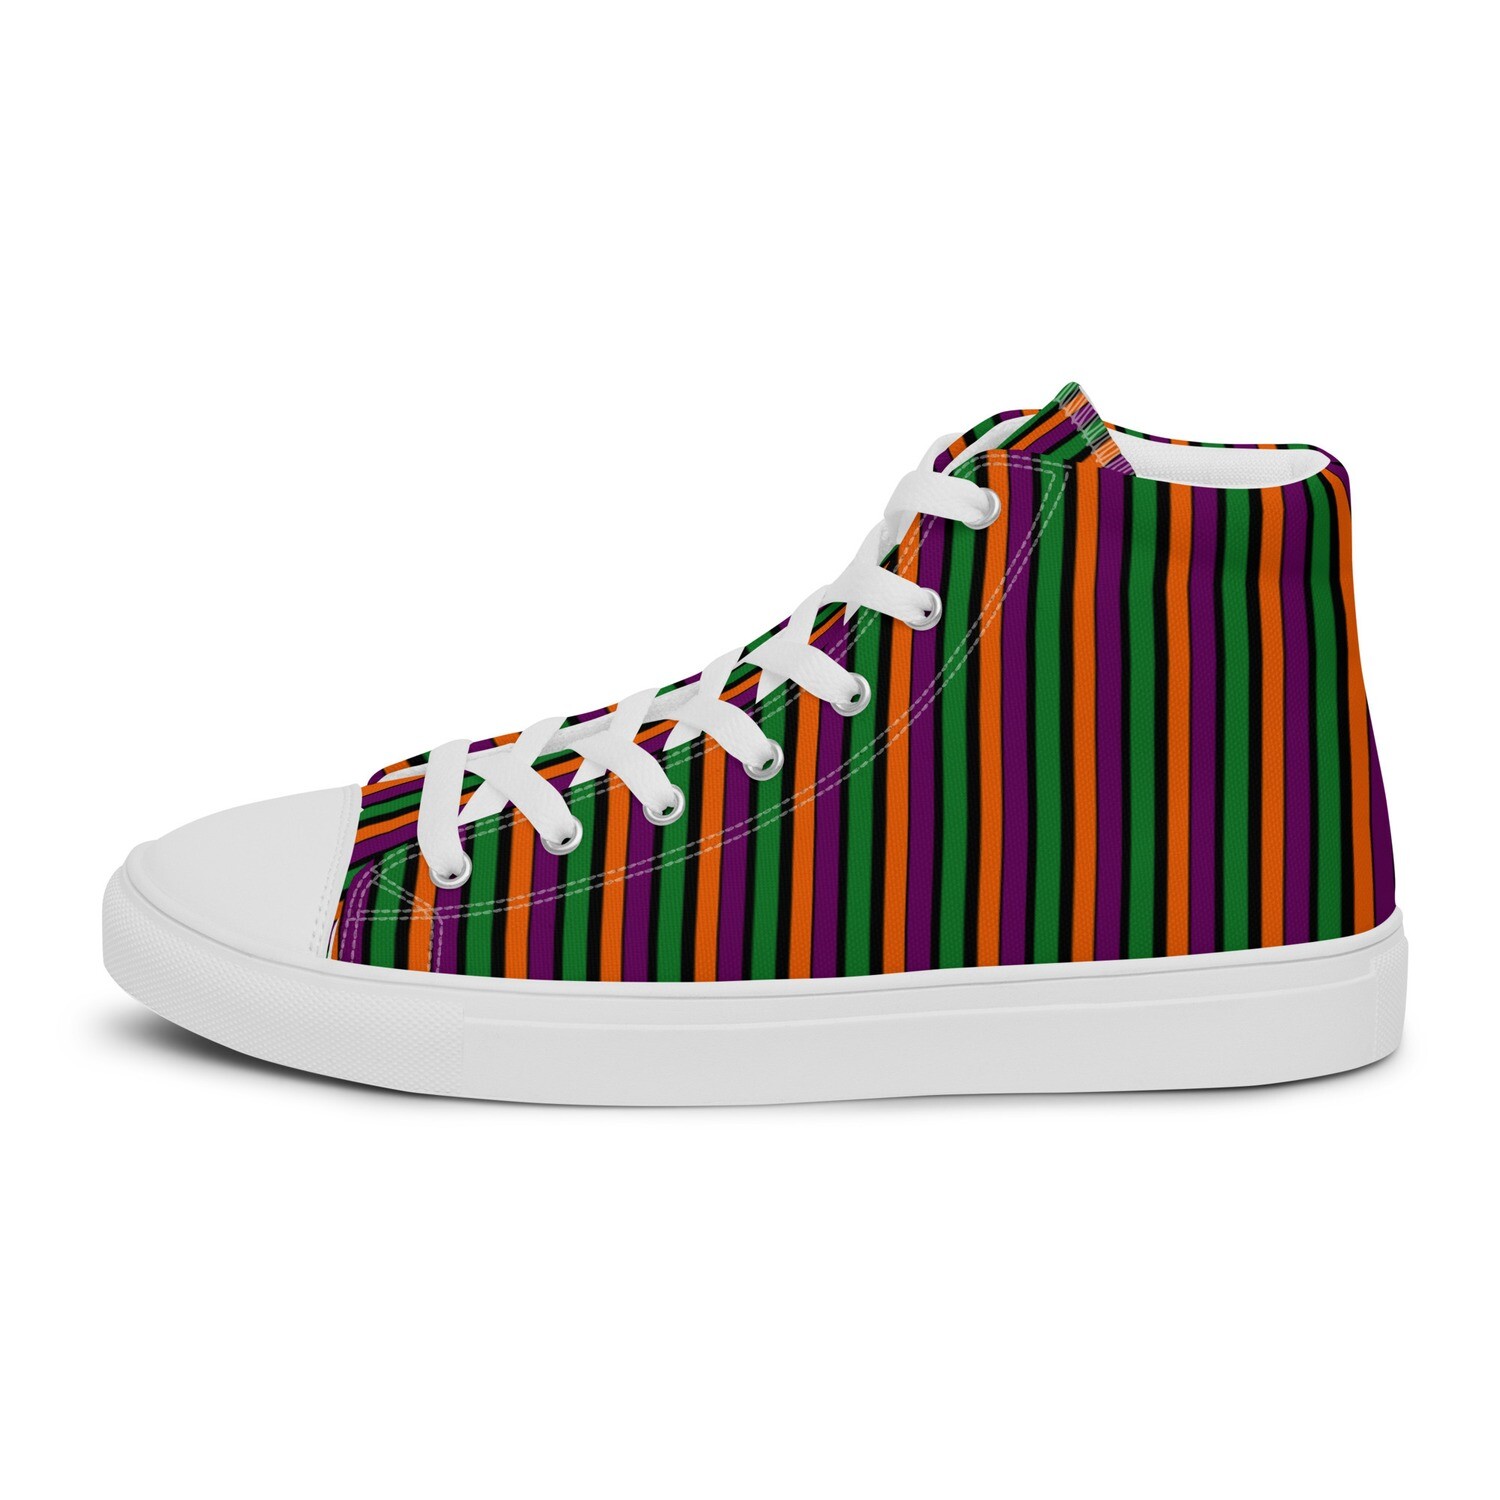 Spooky Carnival Striped Men’s high top canvas shoes